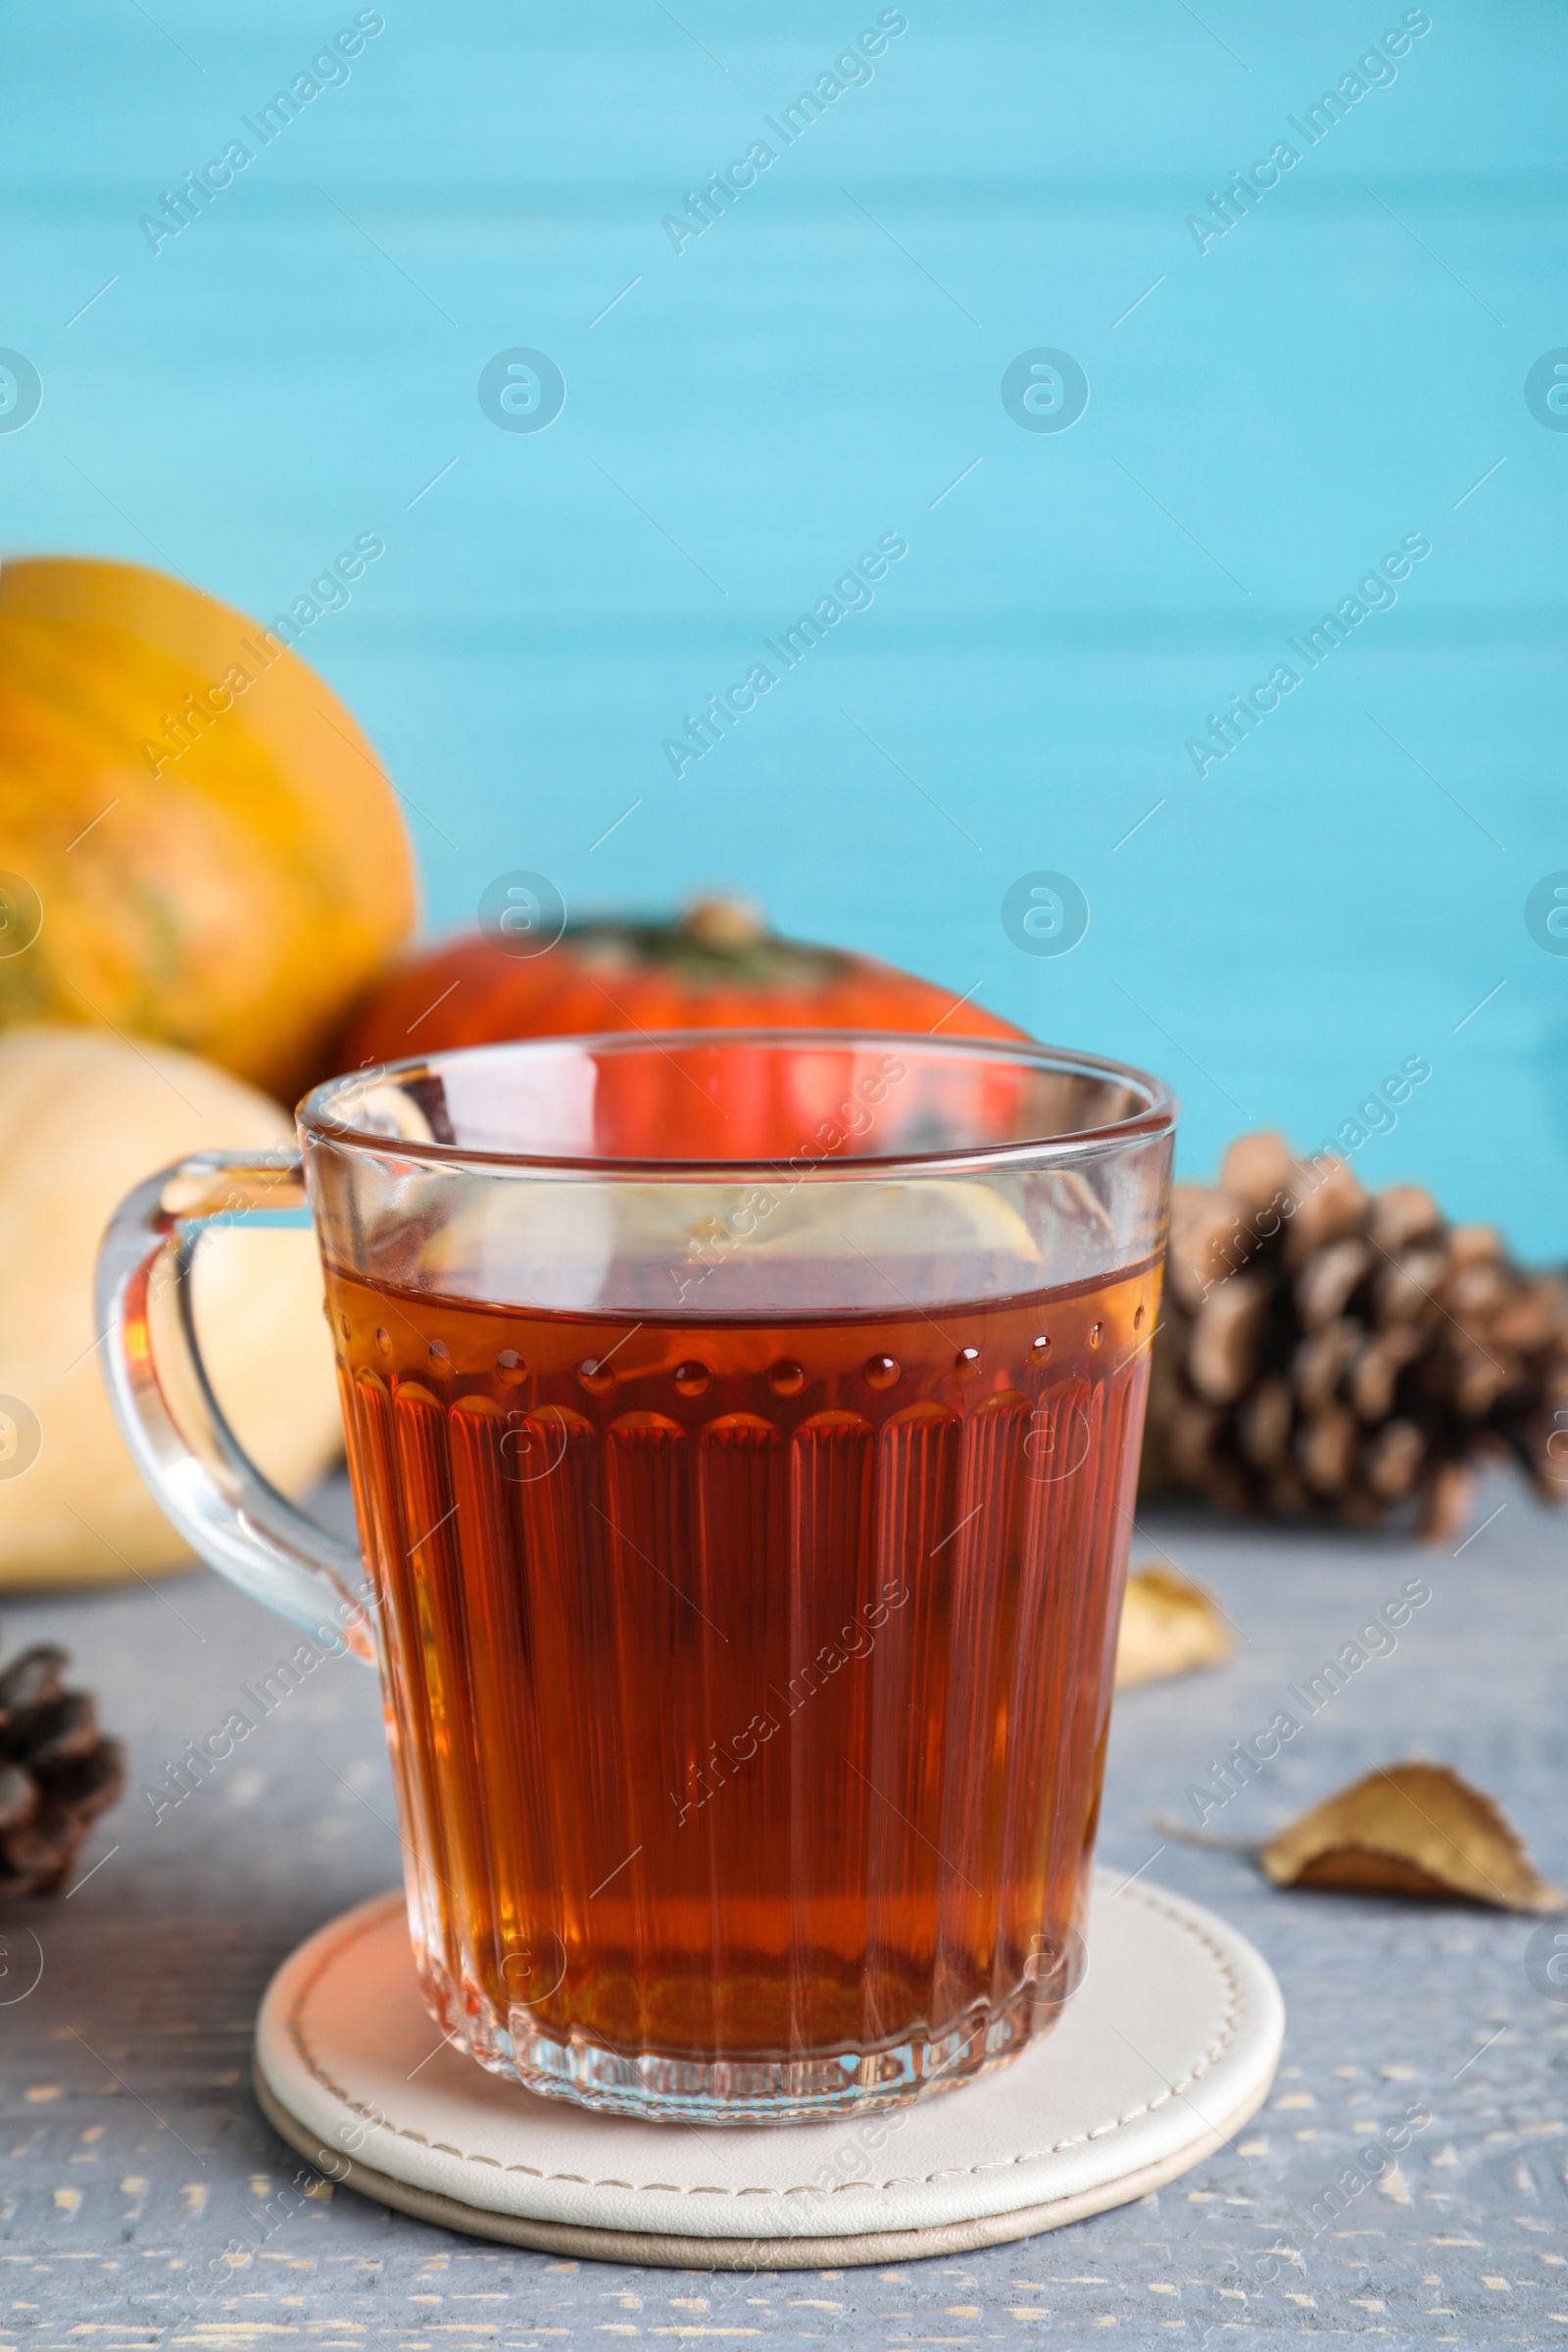 Photo of Cup of hot drink on grey wooden table against blue background. Cozy autumn atmosphere